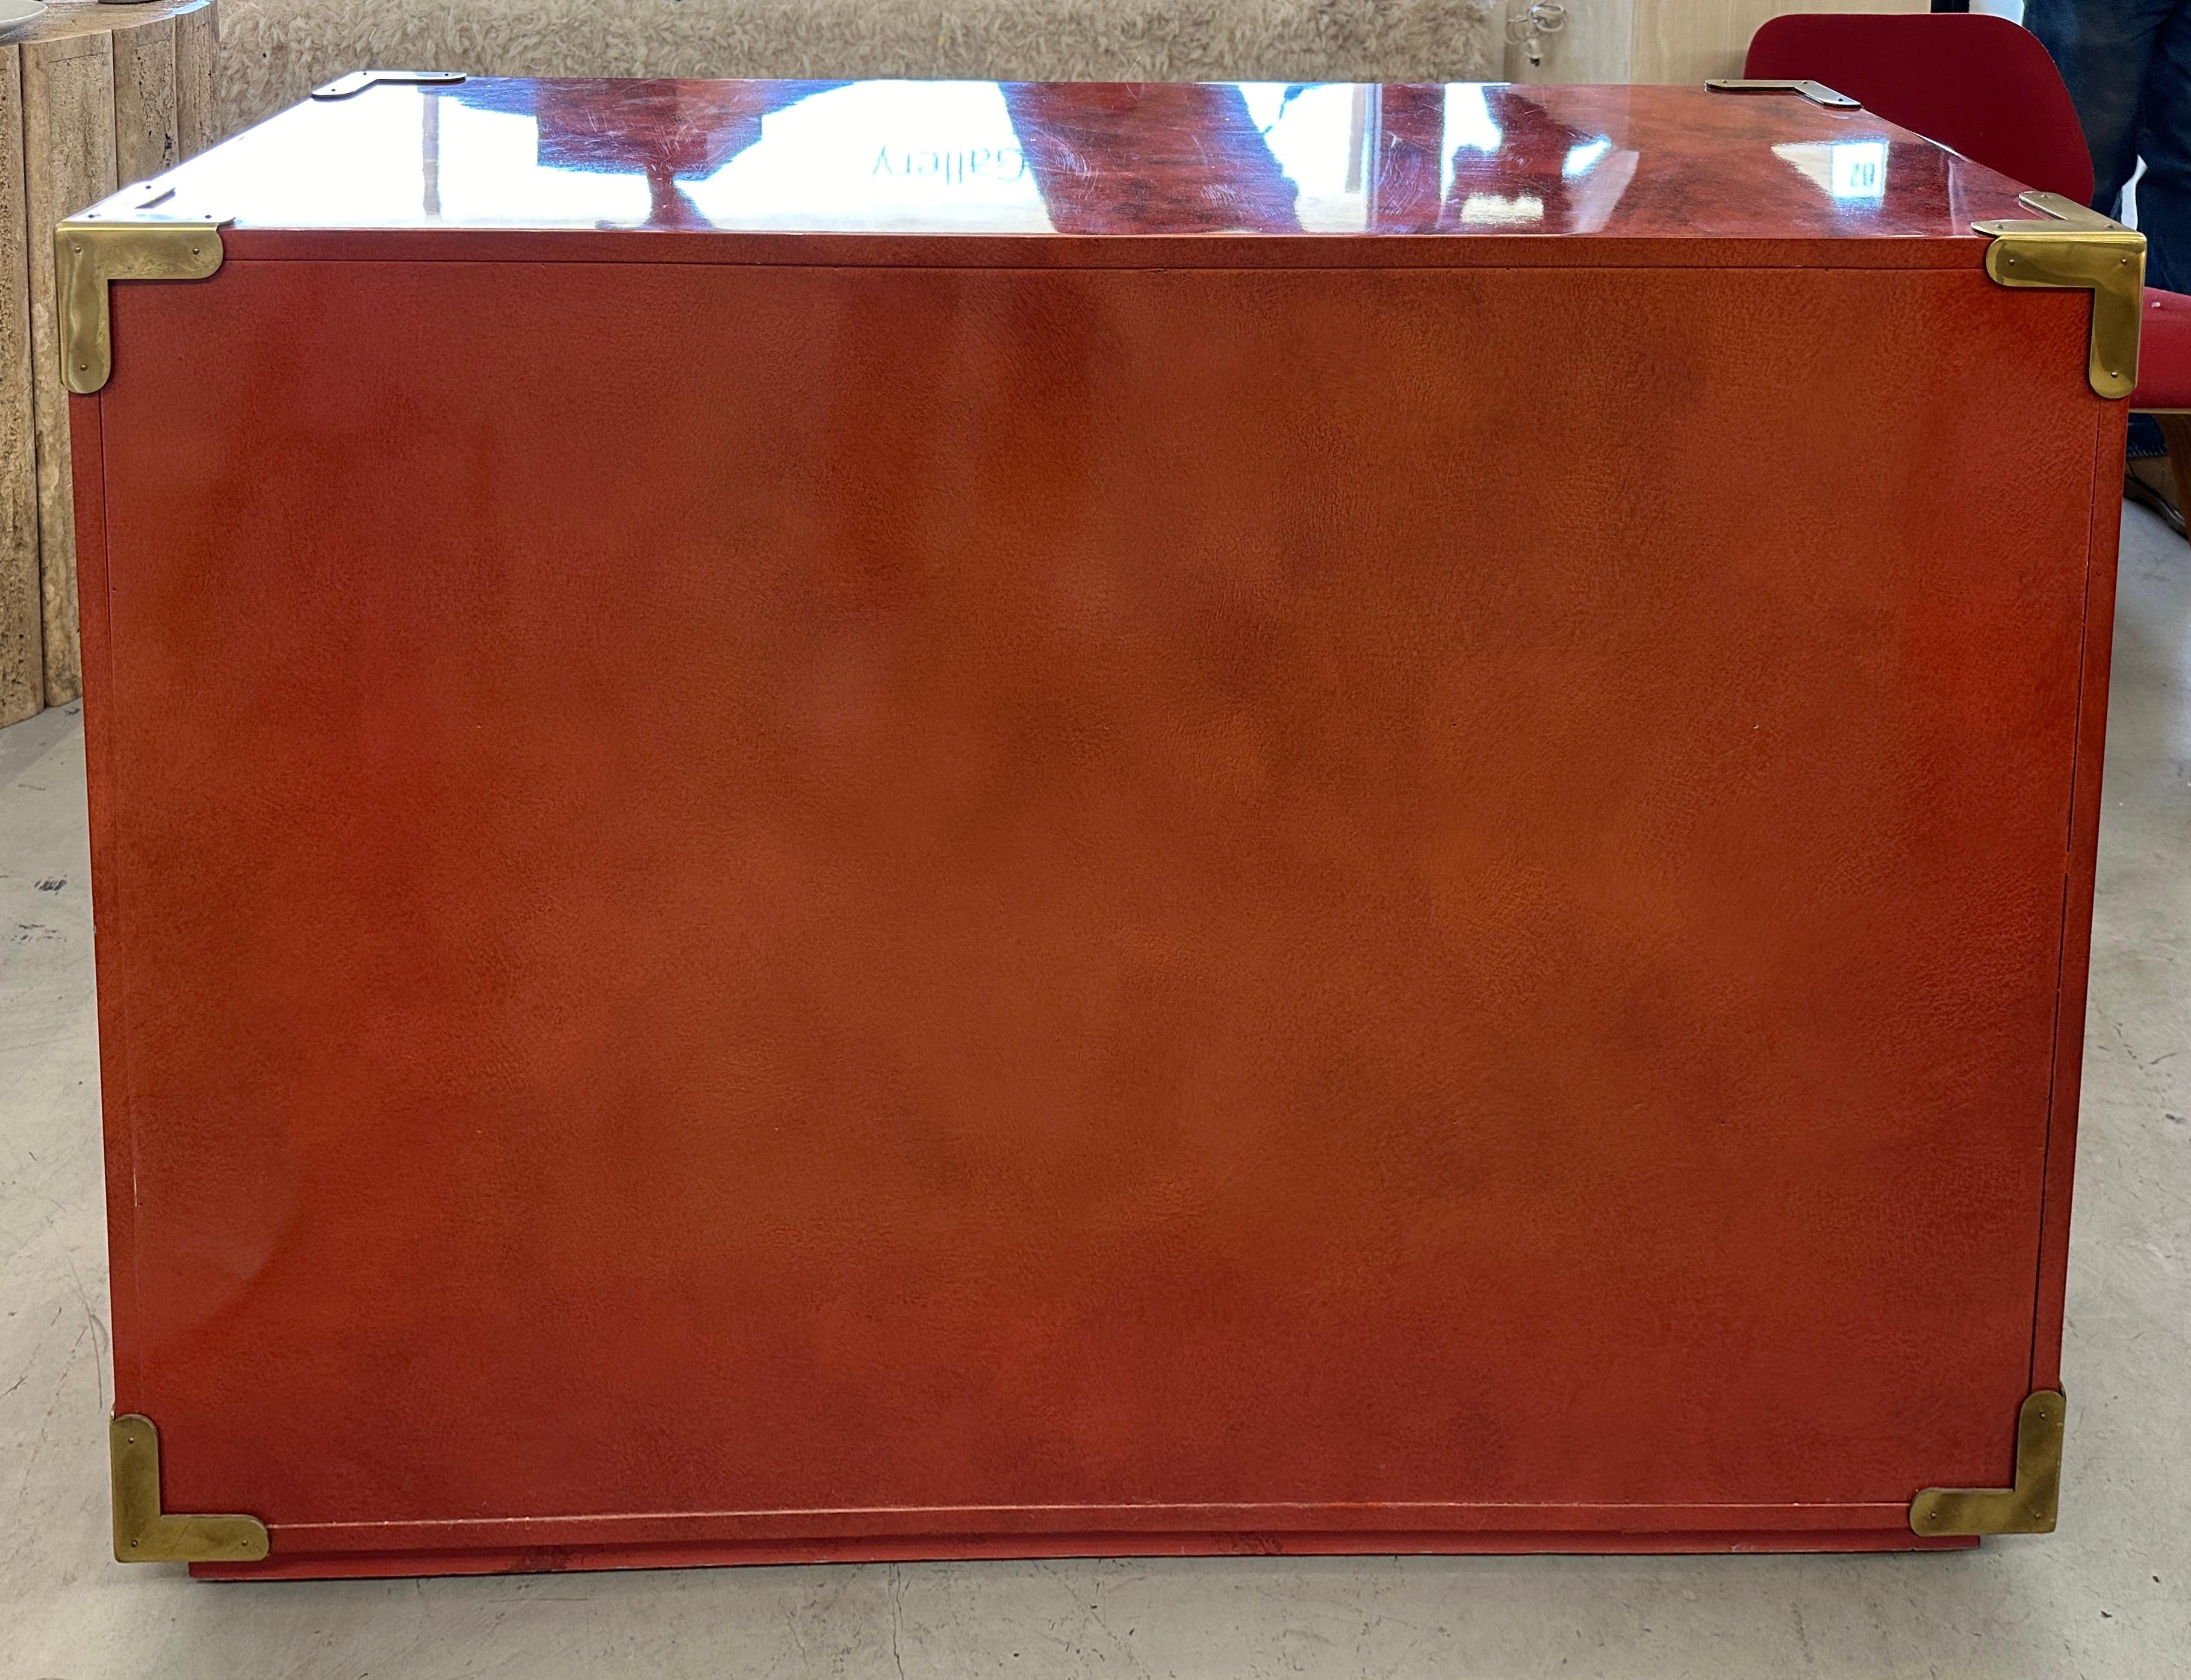 Stunning Coral Red Lacquer & Brass Mastercraft Asian Chest For Sale 1